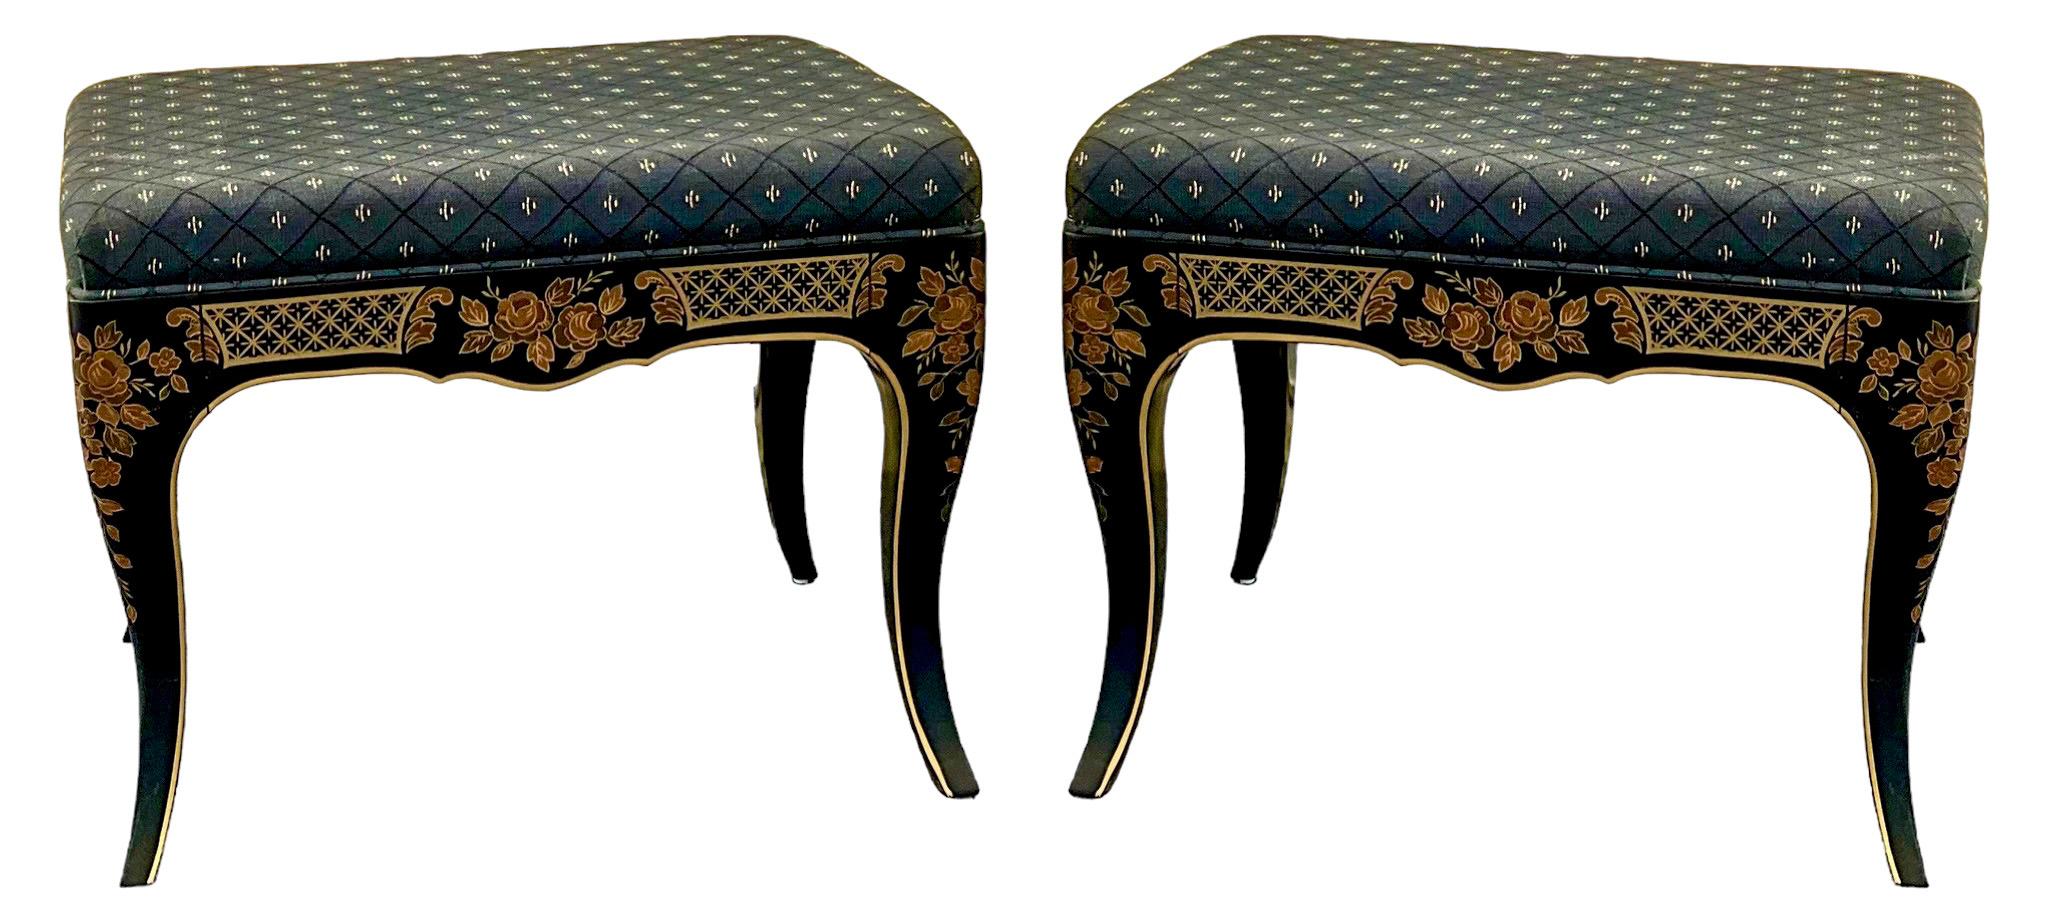 Upholstery 20th Century Black Lacquer Chinoiserie Painted Ottomans - Pail lol For Sale